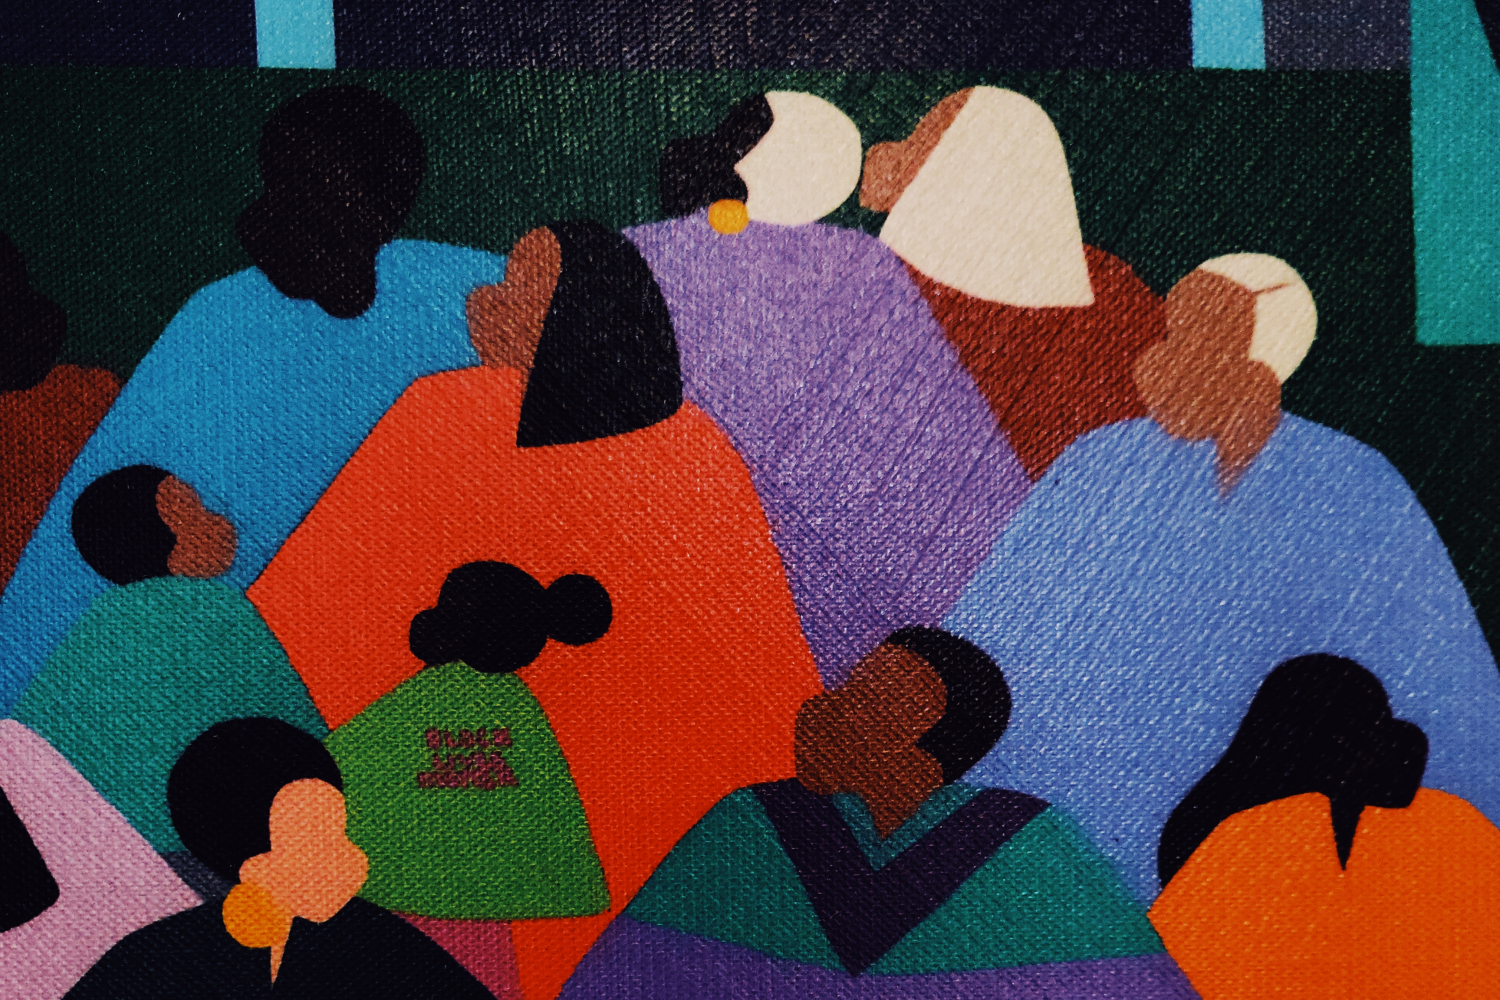 Colourful of many people of looking up. "Black lives matter" is painted very small on a shirt.